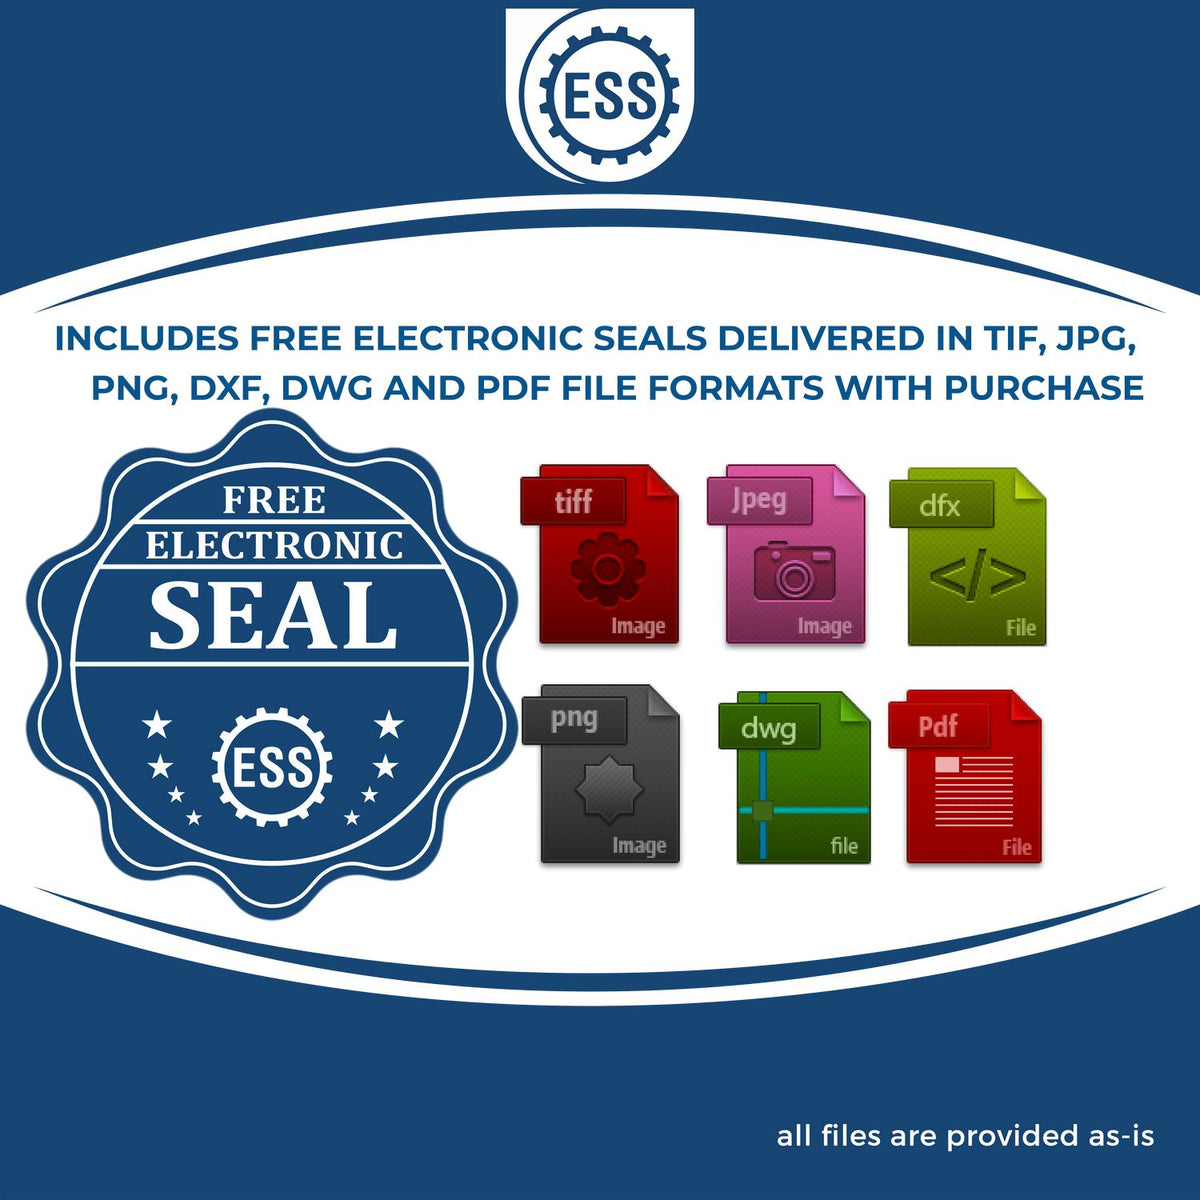 An infographic for the free electronic seal for the Long Reach Michigan Land Surveyor Seal illustrating the different file type icons such as DXF, DWG, TIF, JPG and PNG.